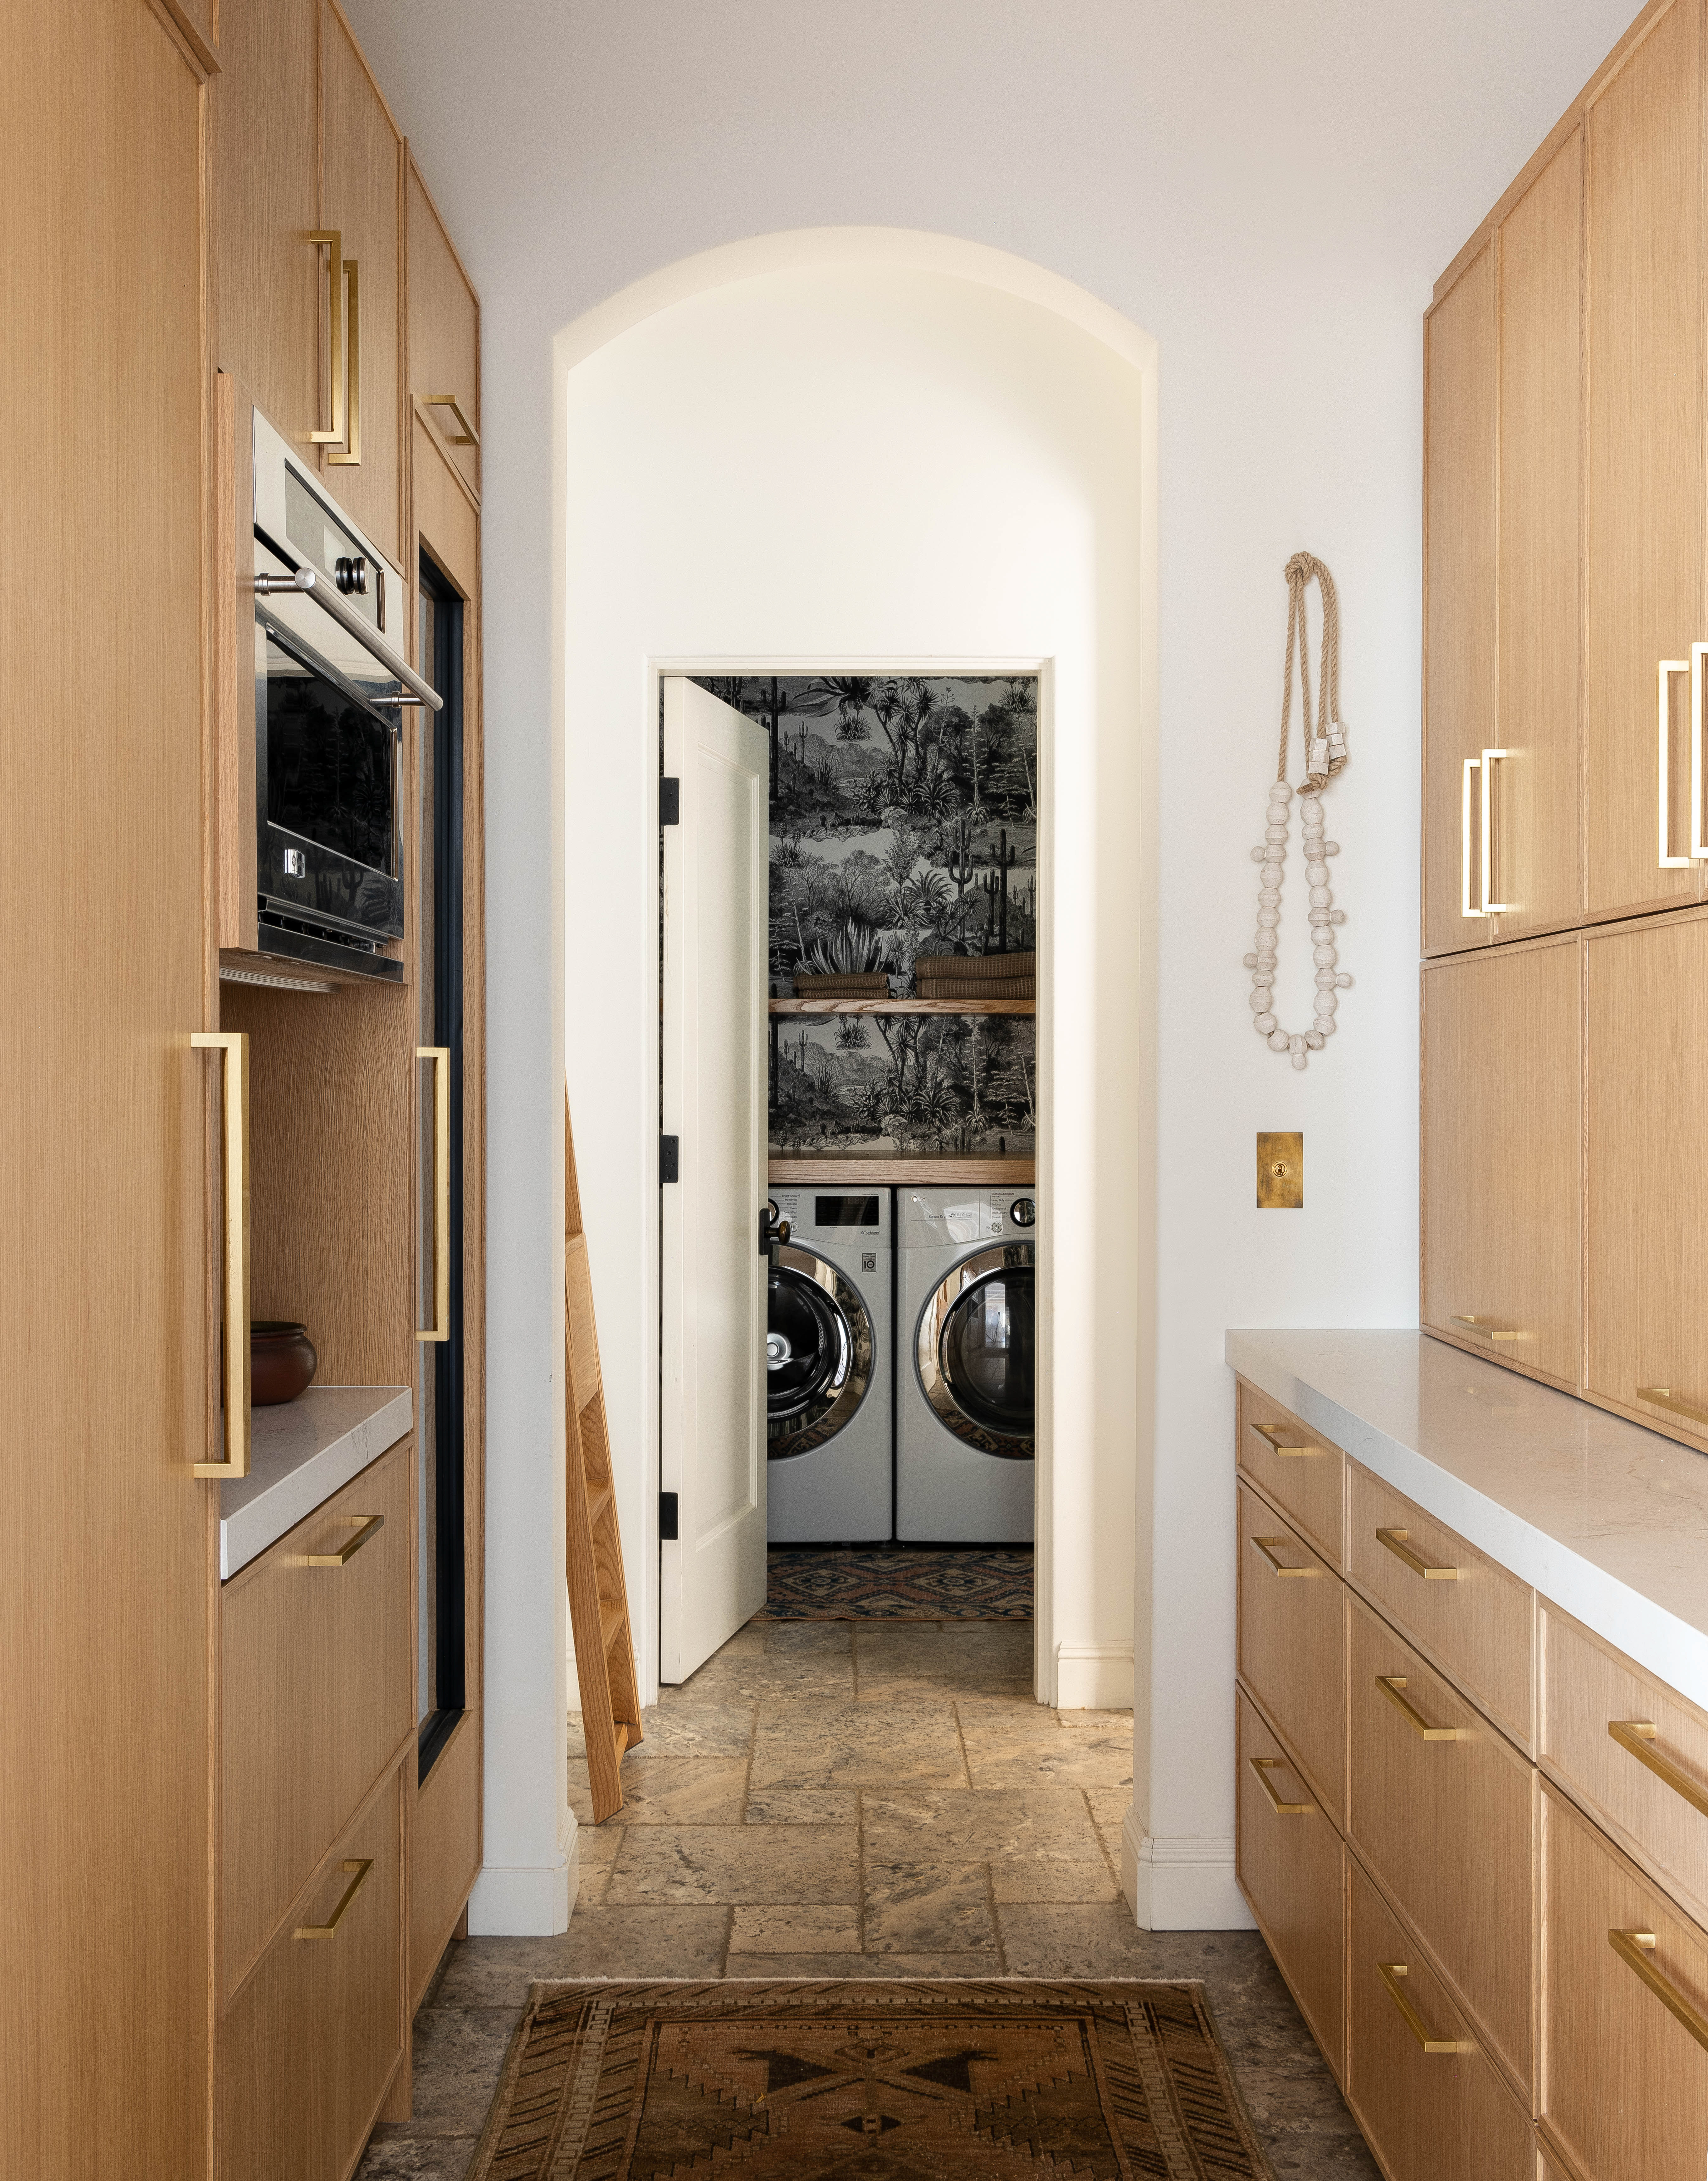 Laundry room and butler pantry with striking black and white desert scene wall covering. The design features arched doorways for added elegance.